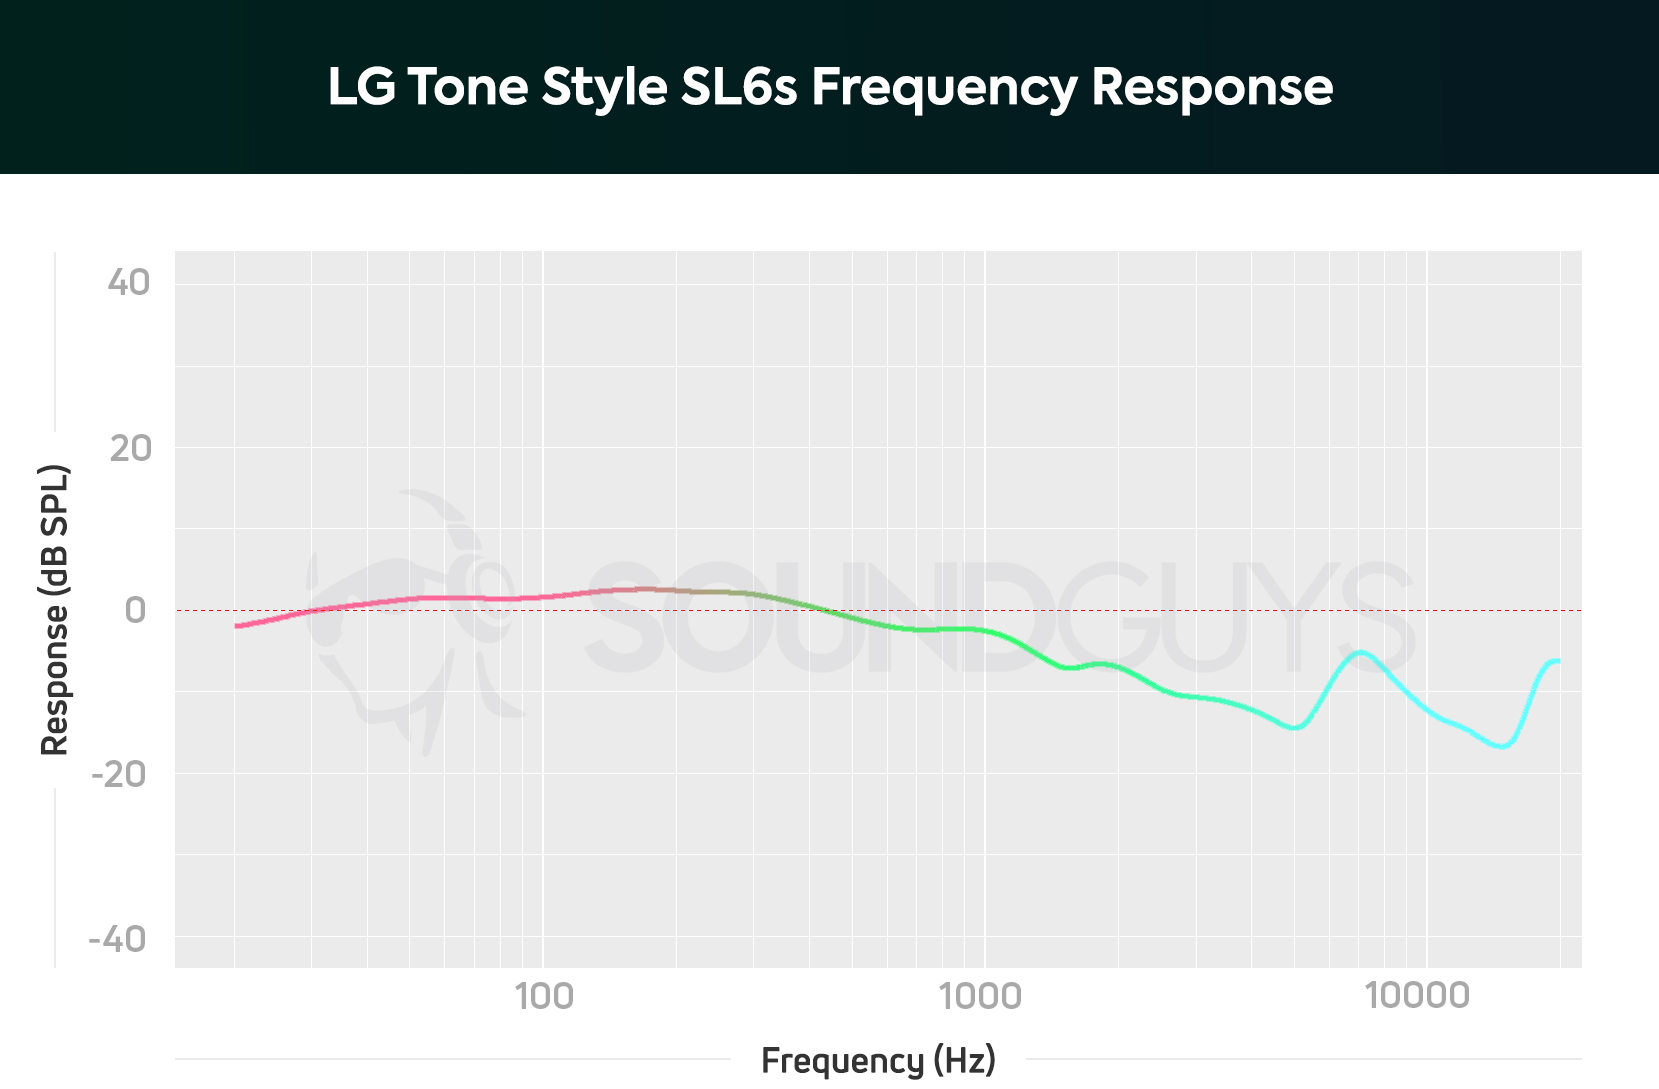 LG Tone Style SL6s frequency response chart.